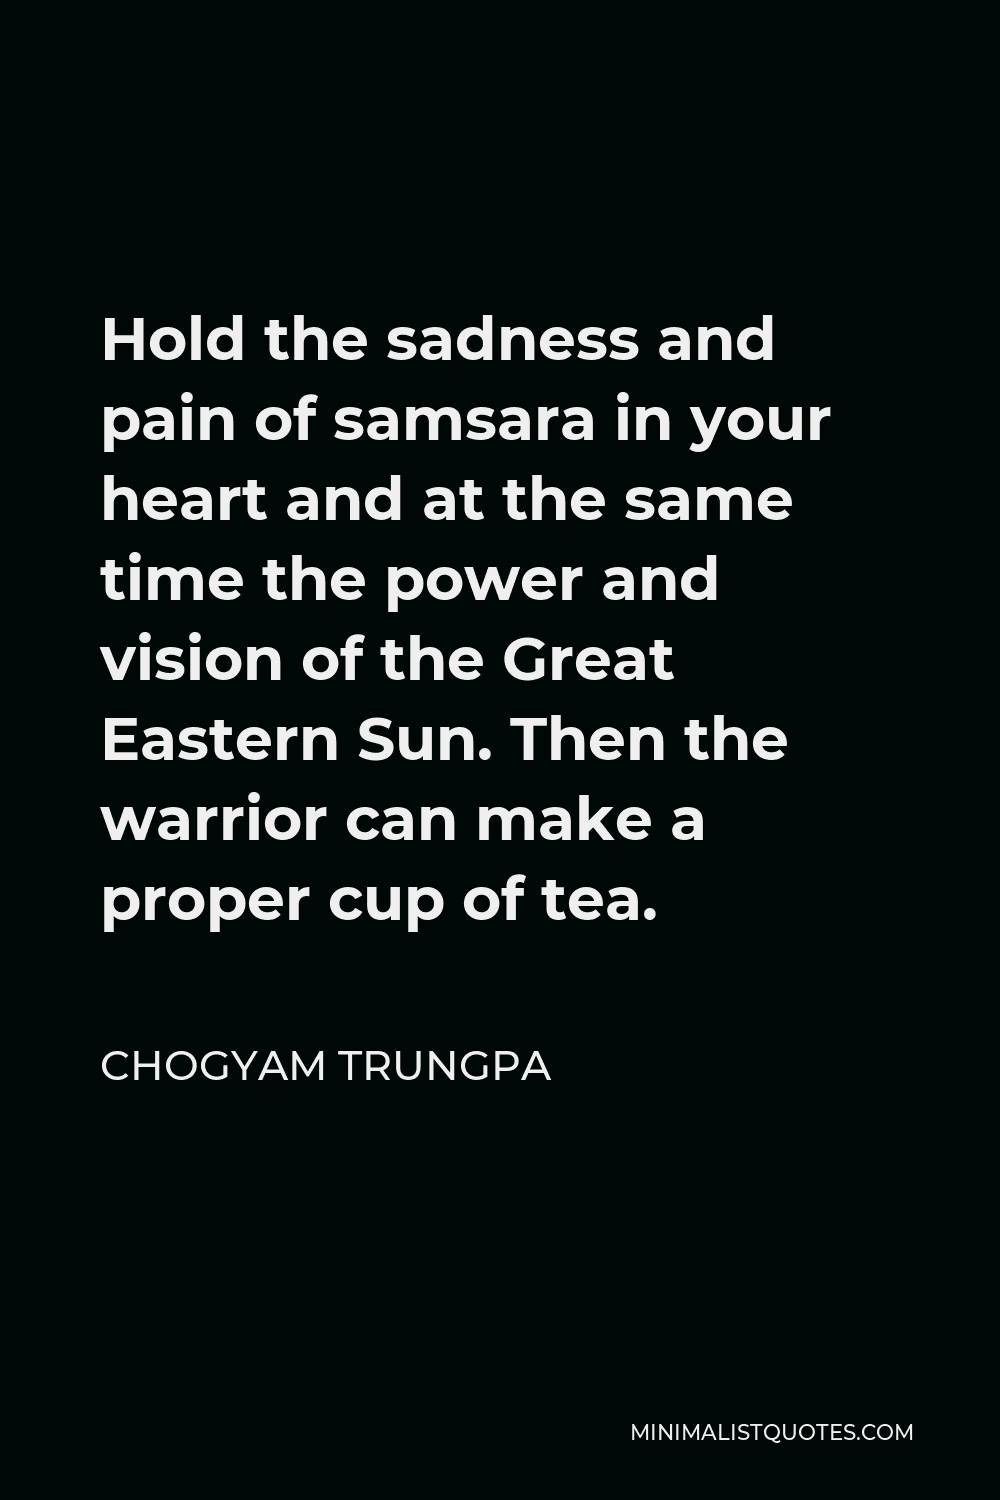 Chogyam Trungpa Quote - Hold the sadness and pain of samsara in your heart and at the same time the power and vision of the Great Eastern Sun. Then the warrior can make a proper cup of tea.